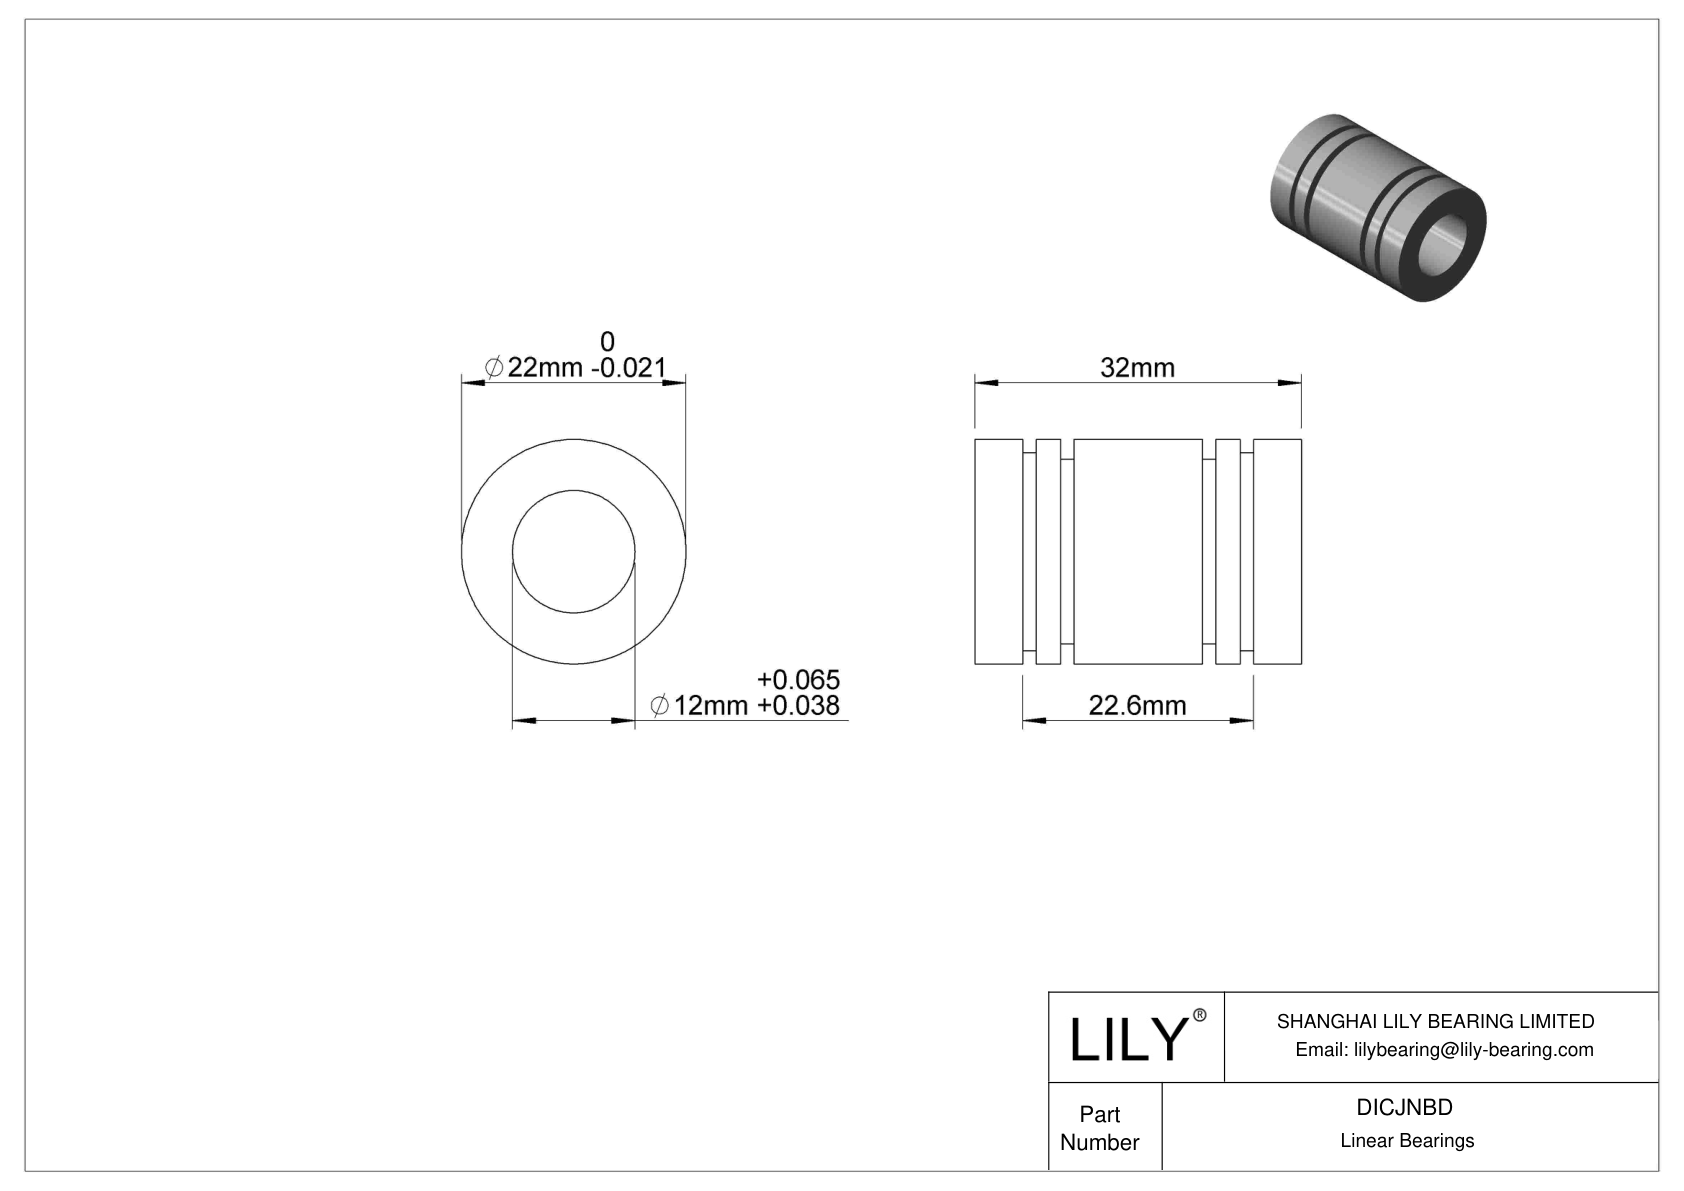 DICJNBD Common Linear Sleeve Bearings cad drawing